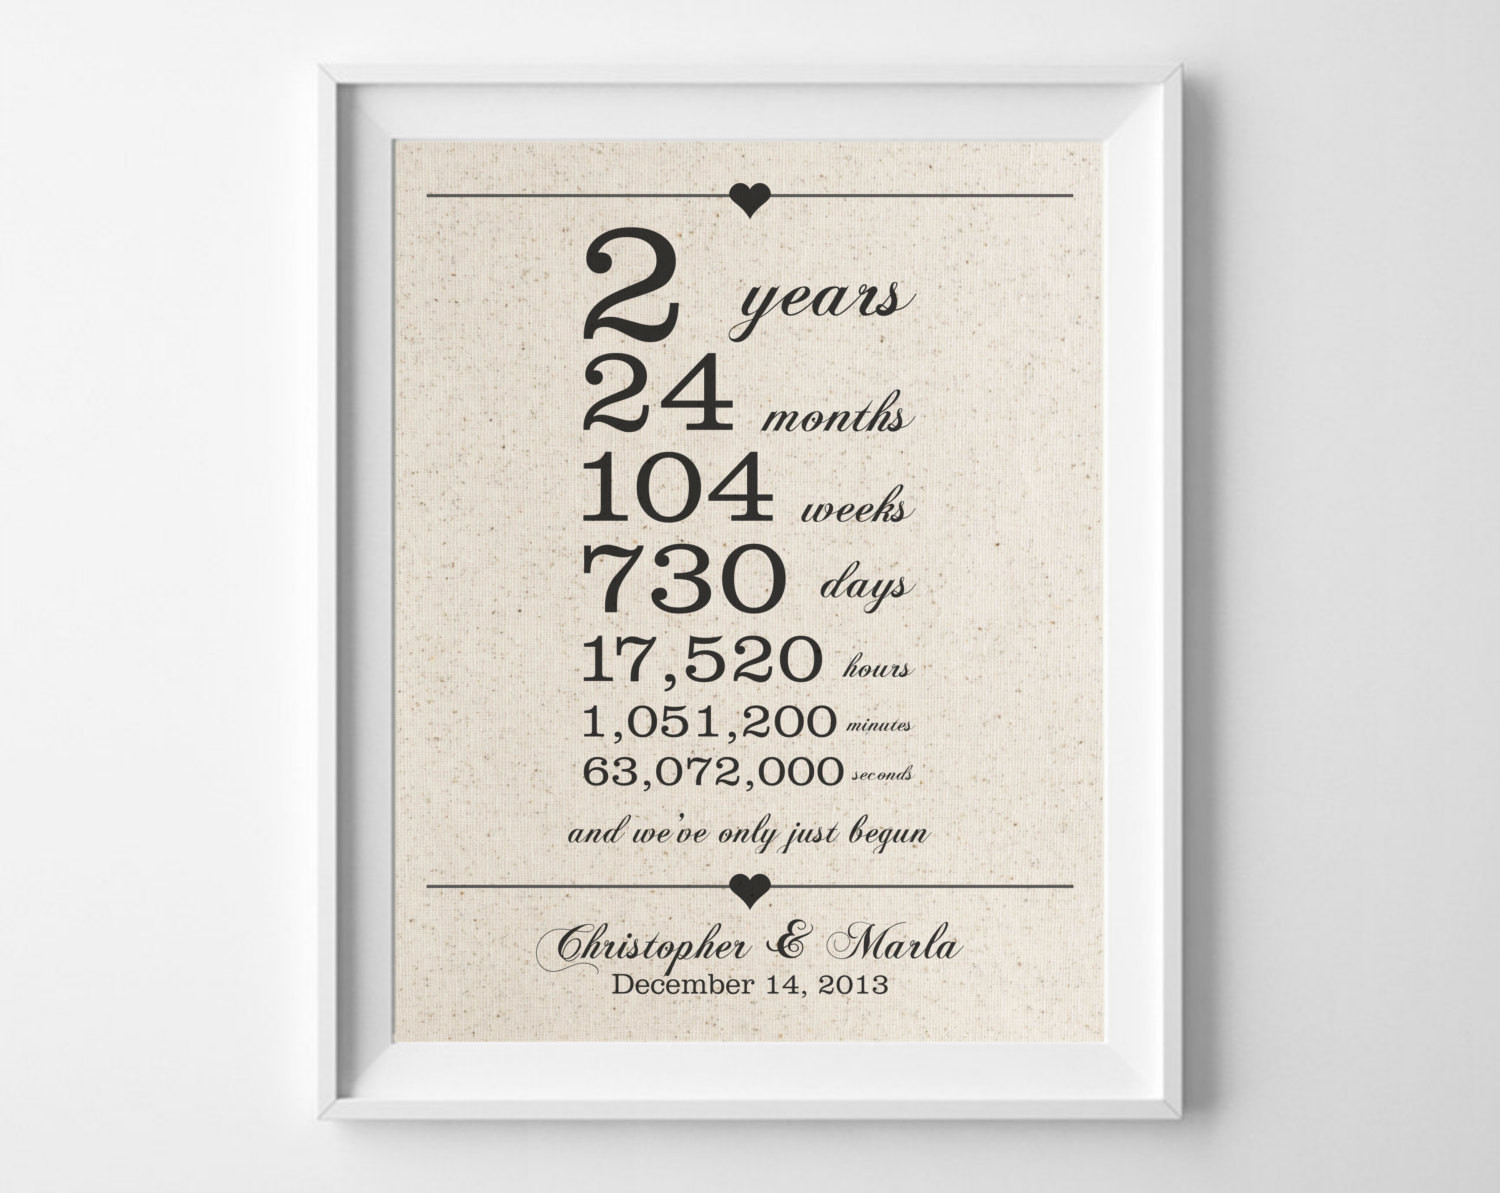 2Nd Anniversary Gift Ideas For Husband
 2 years to her Cotton Anniversary Print 2nd Anniversary